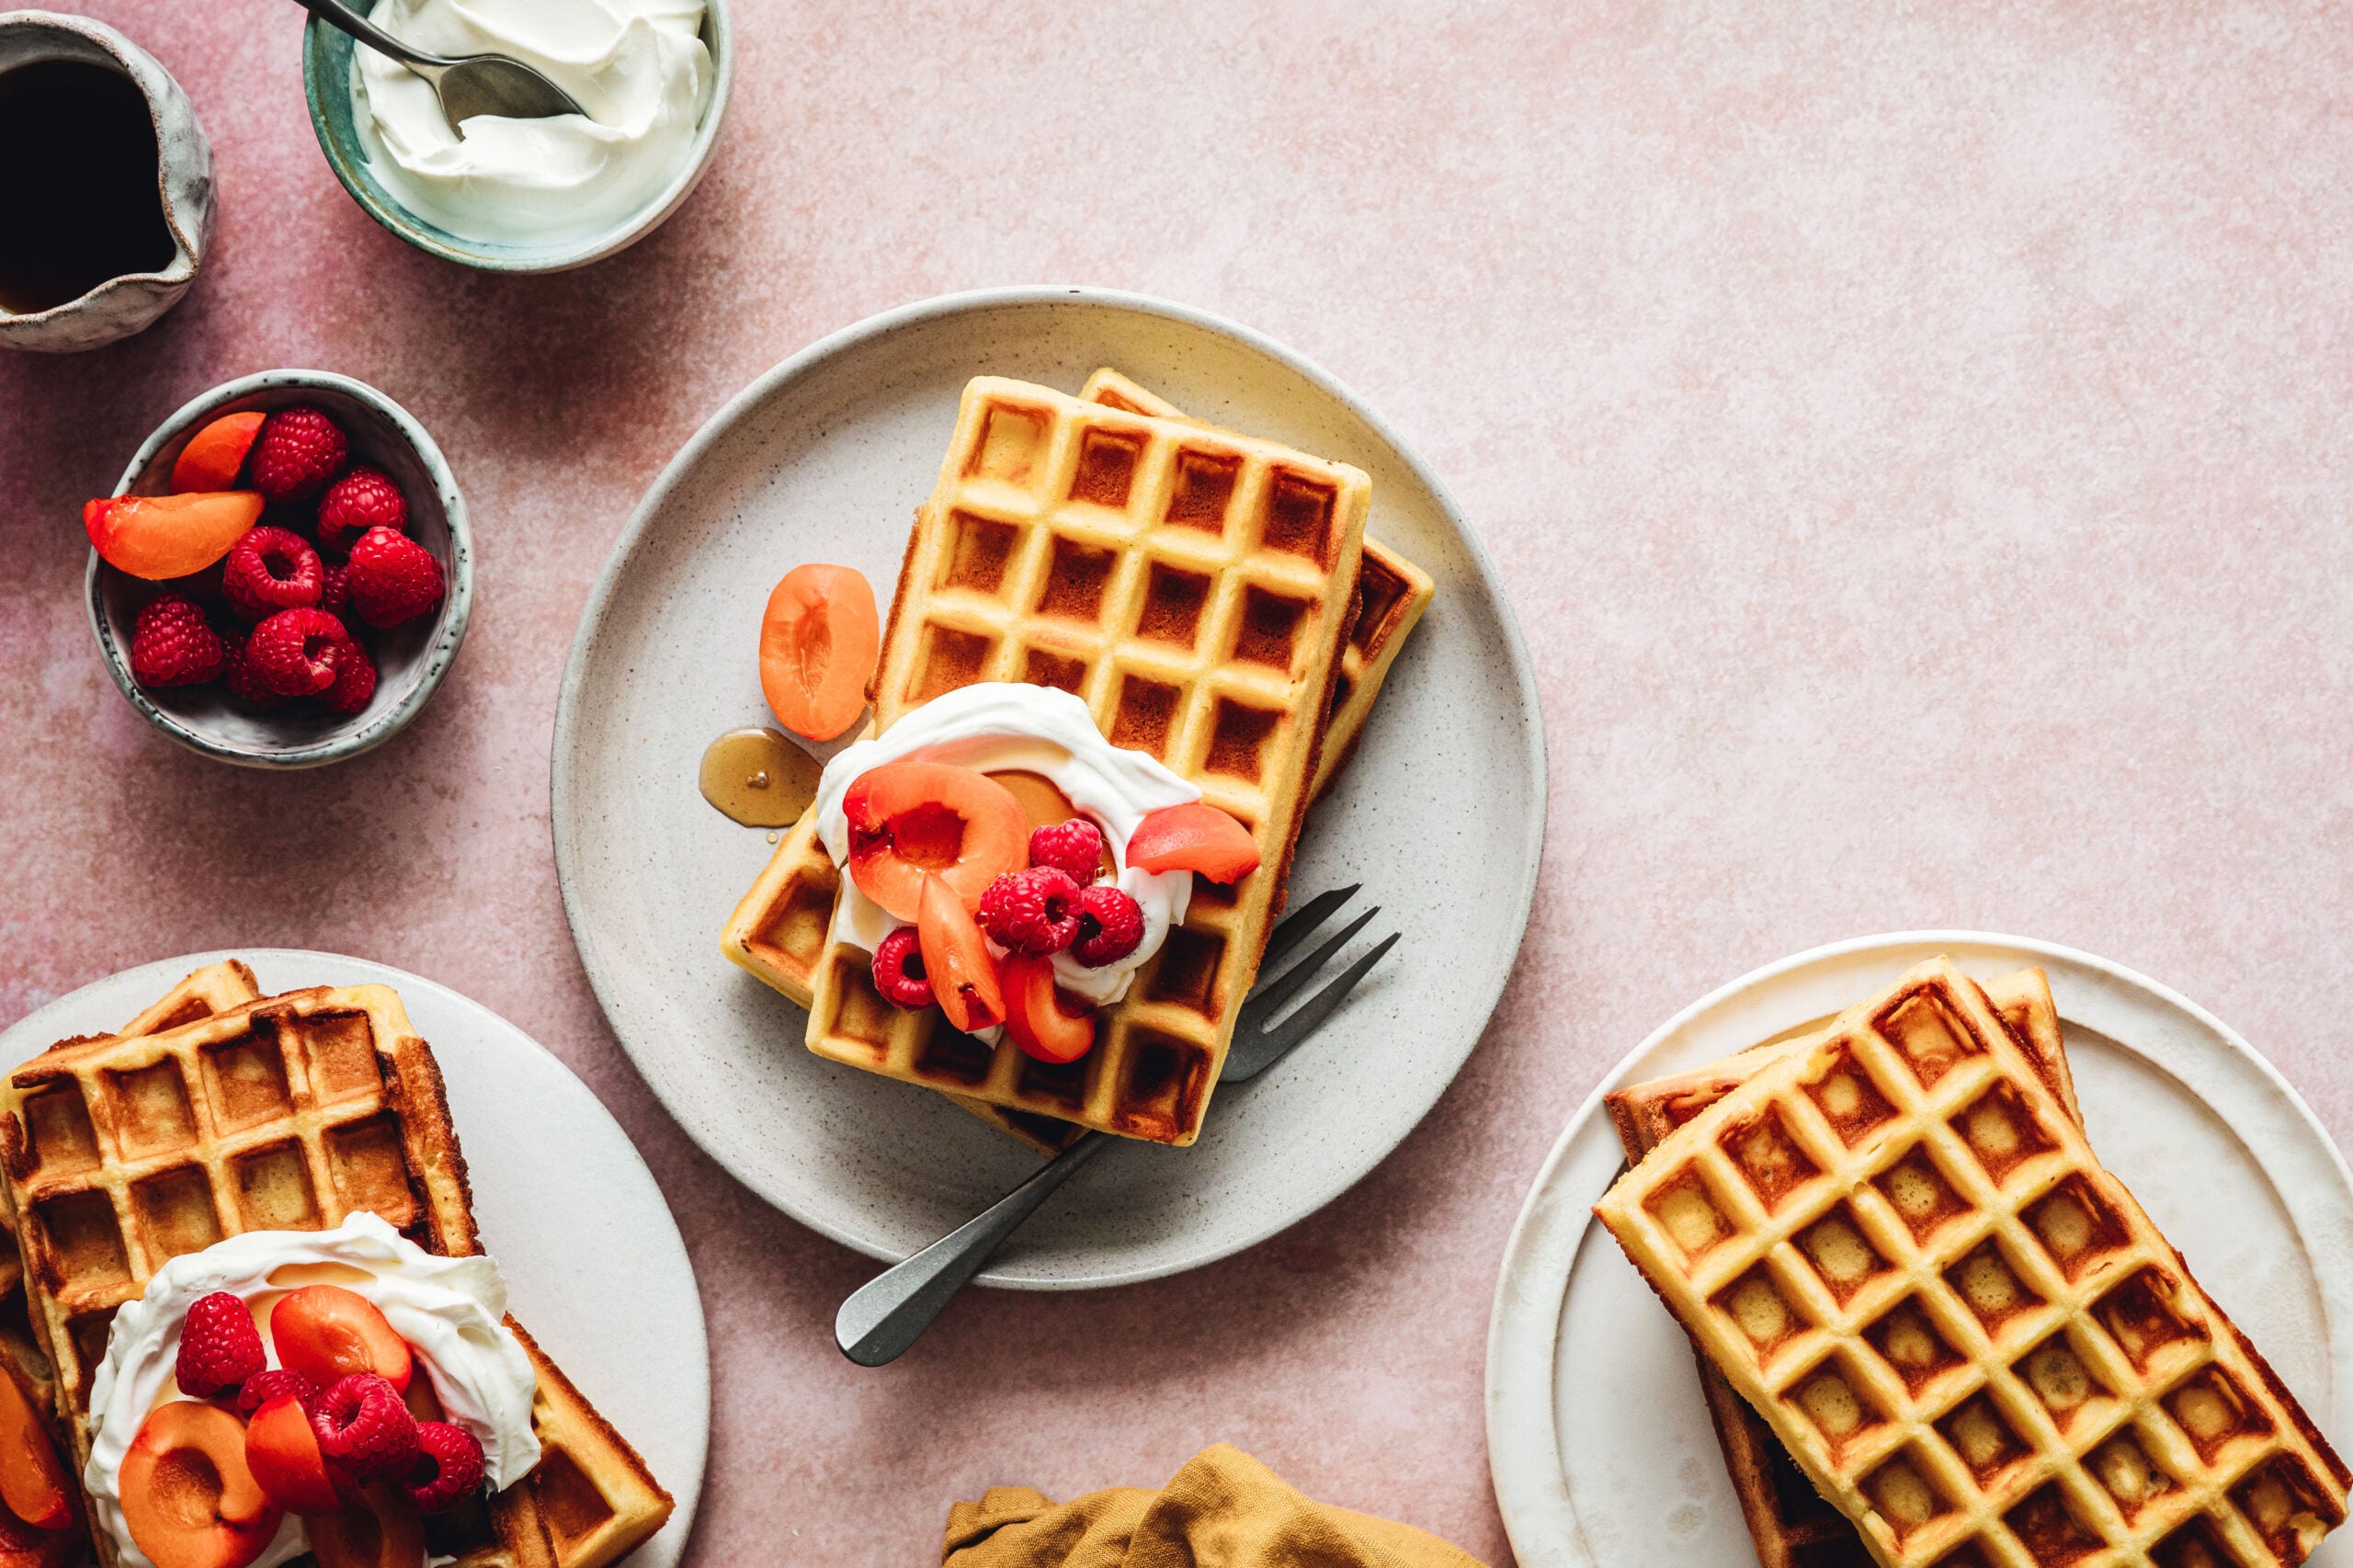 Your Essential Guide On How To Clean Cuisinart Waffle Maker